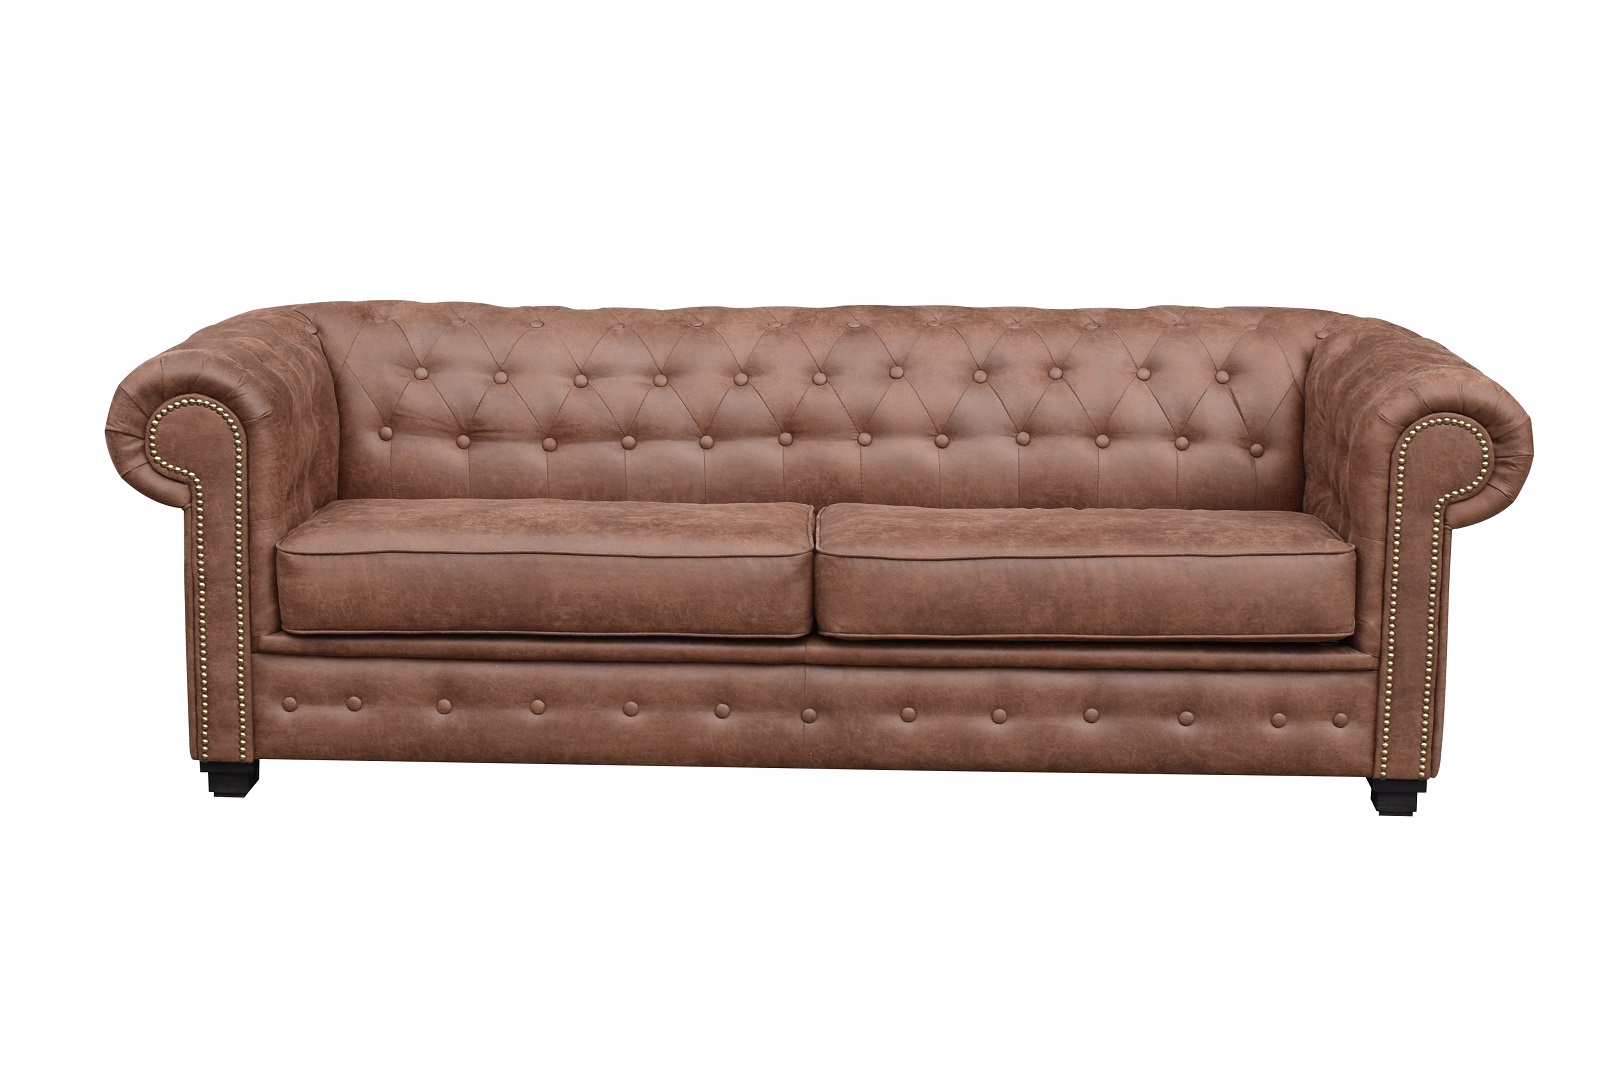 Discover Sofa King's Handcrafted Range: From Luxury Leather Sofas to Quick-Delivery Beds